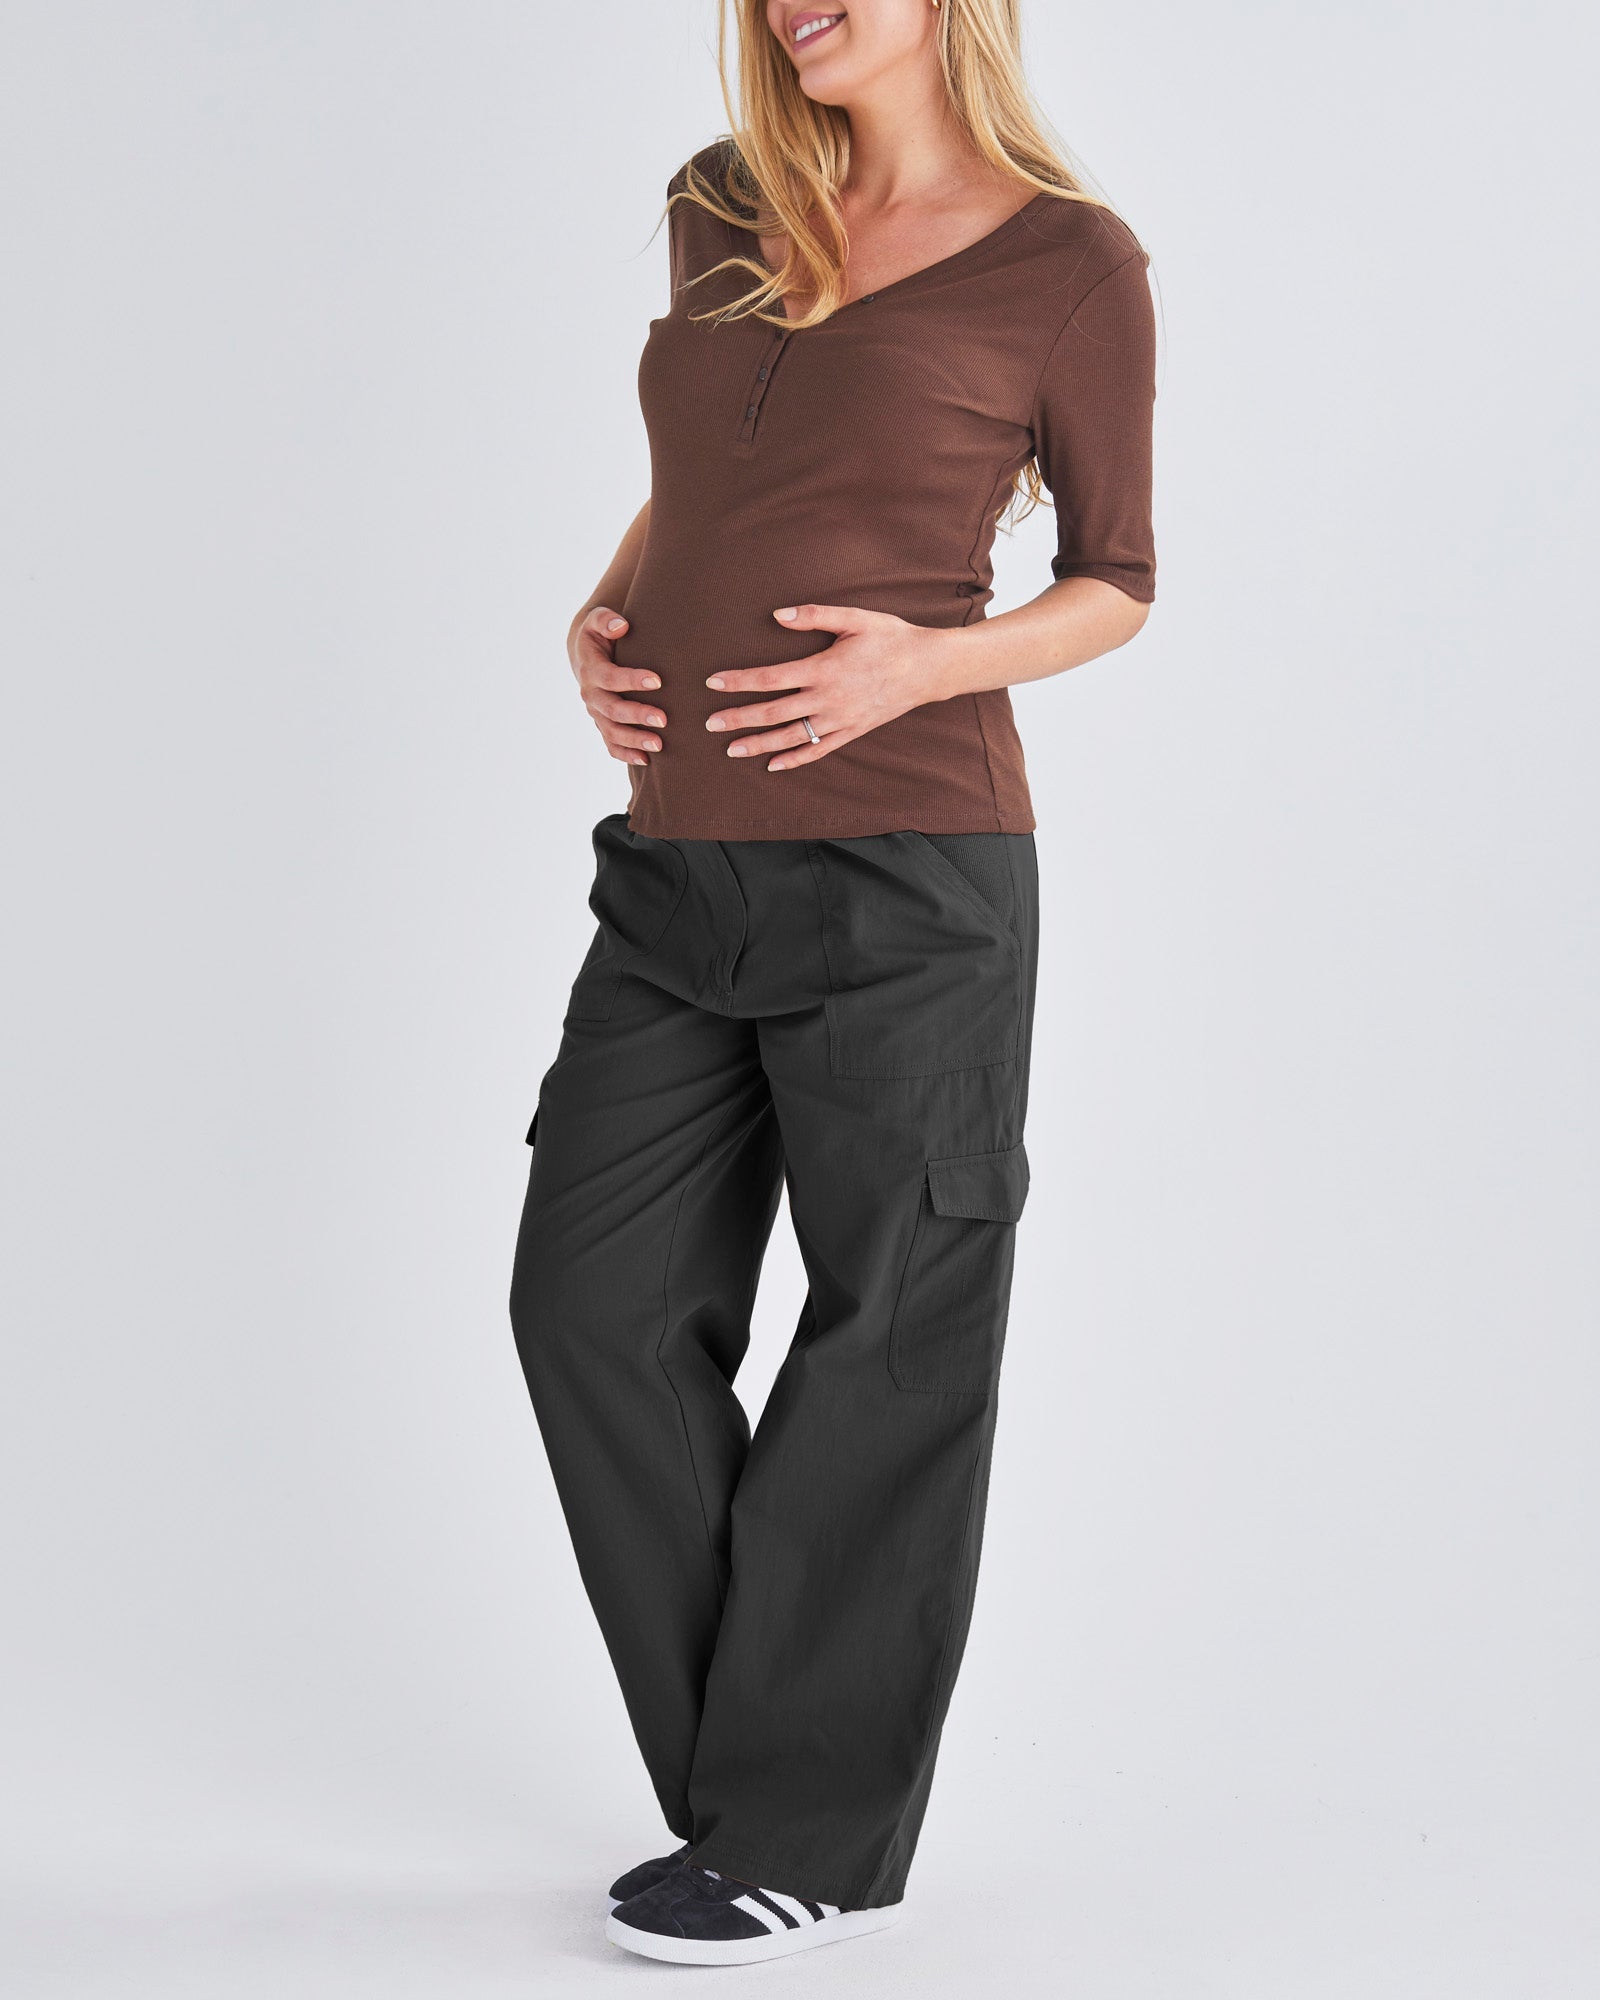 A Pregnant Woman Wearing Black Maternity Cotton Cargo Pants from Angel Maternity